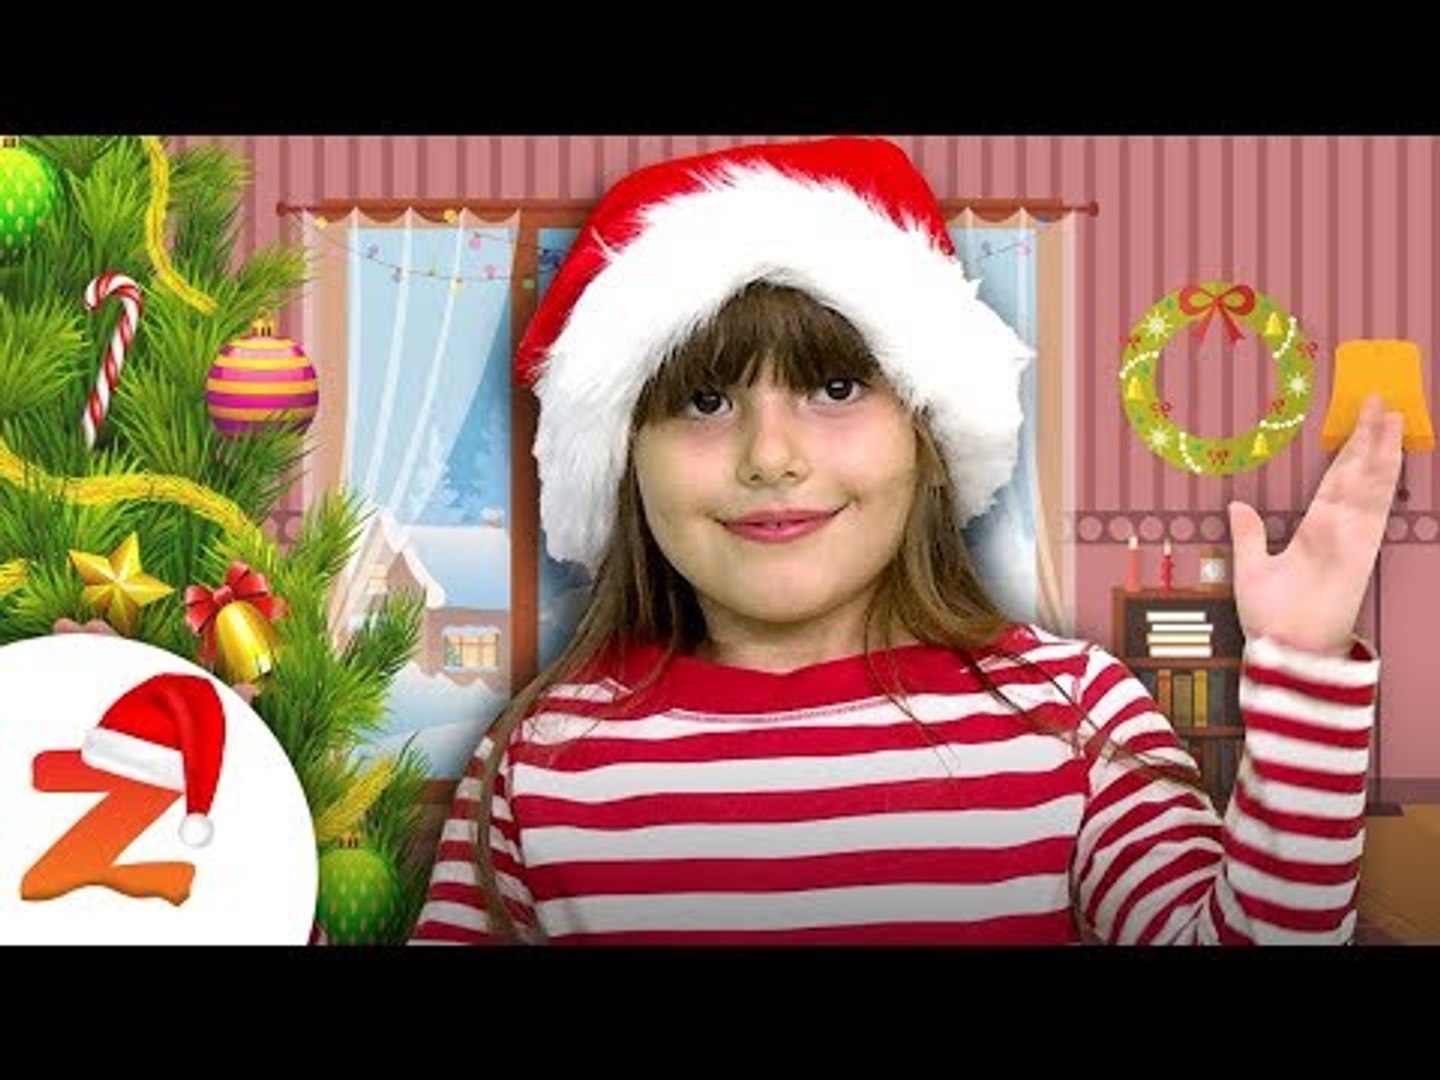 If You Re Happy And You Know It Clap Your Hands New Nursery Rhymes Christmas Songs For Kids Video Dailymotion